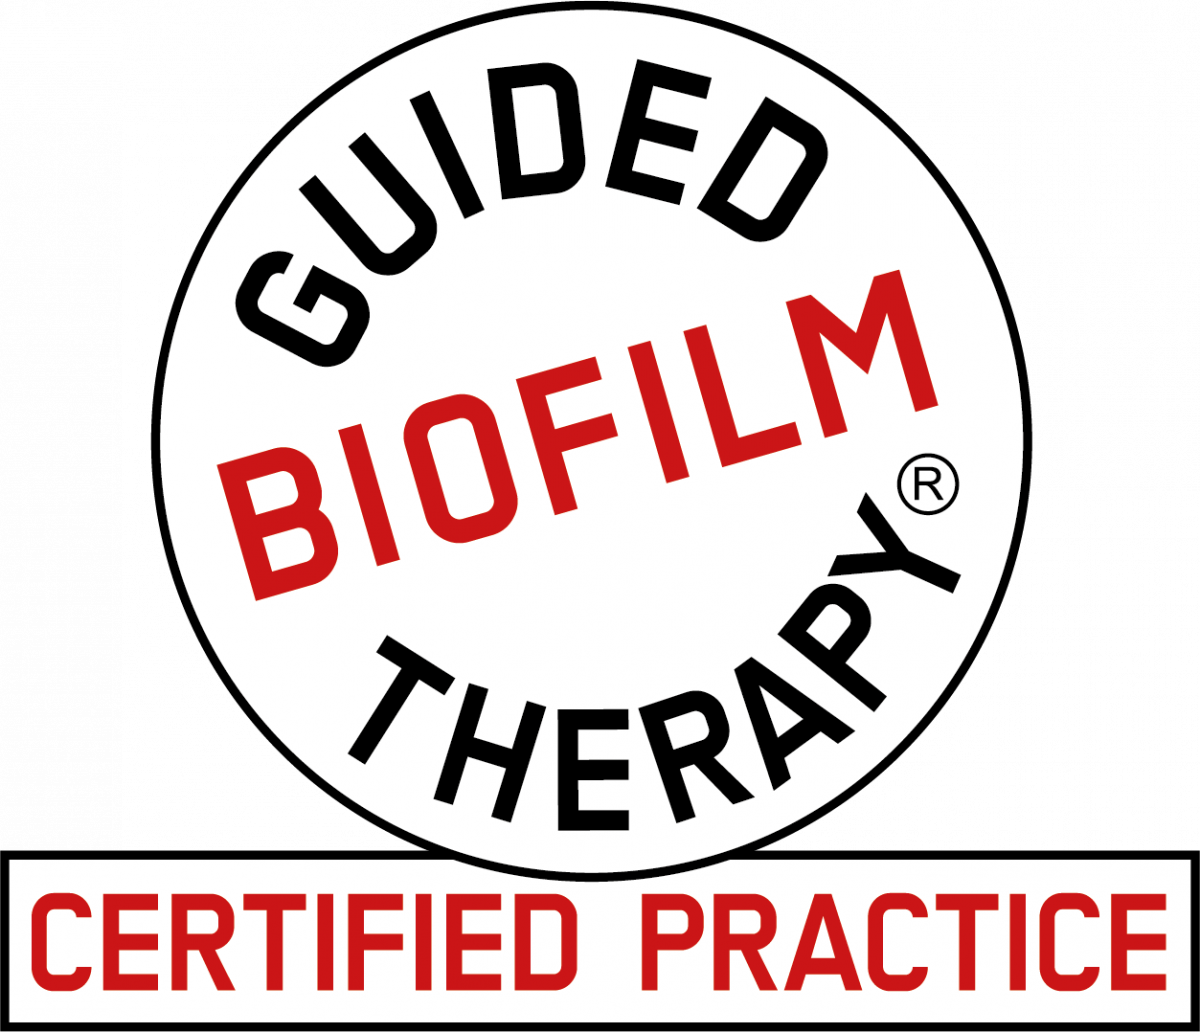 guided-biofilm-logo-1200x1032.png